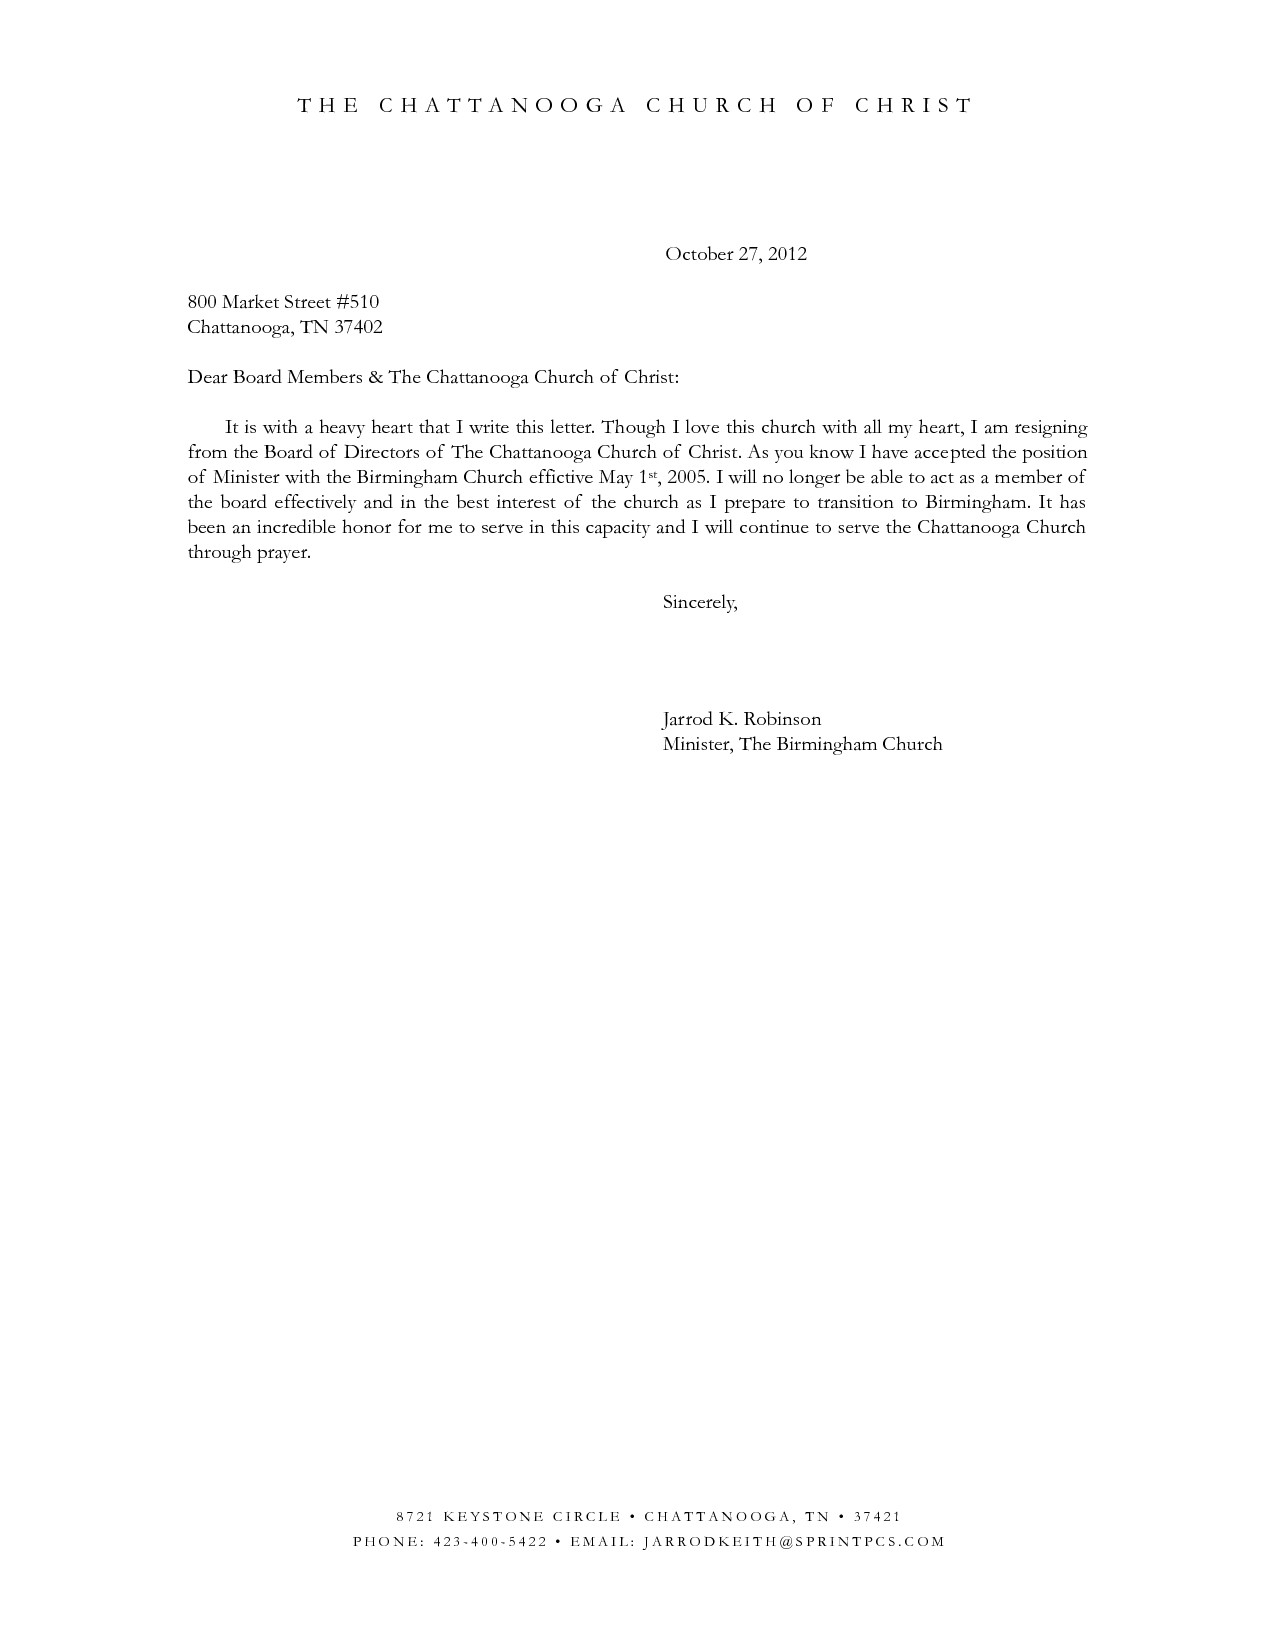 Free Resignation Letter Template Word - Free Resignation Letter Template Word Best Sample Cover Letter